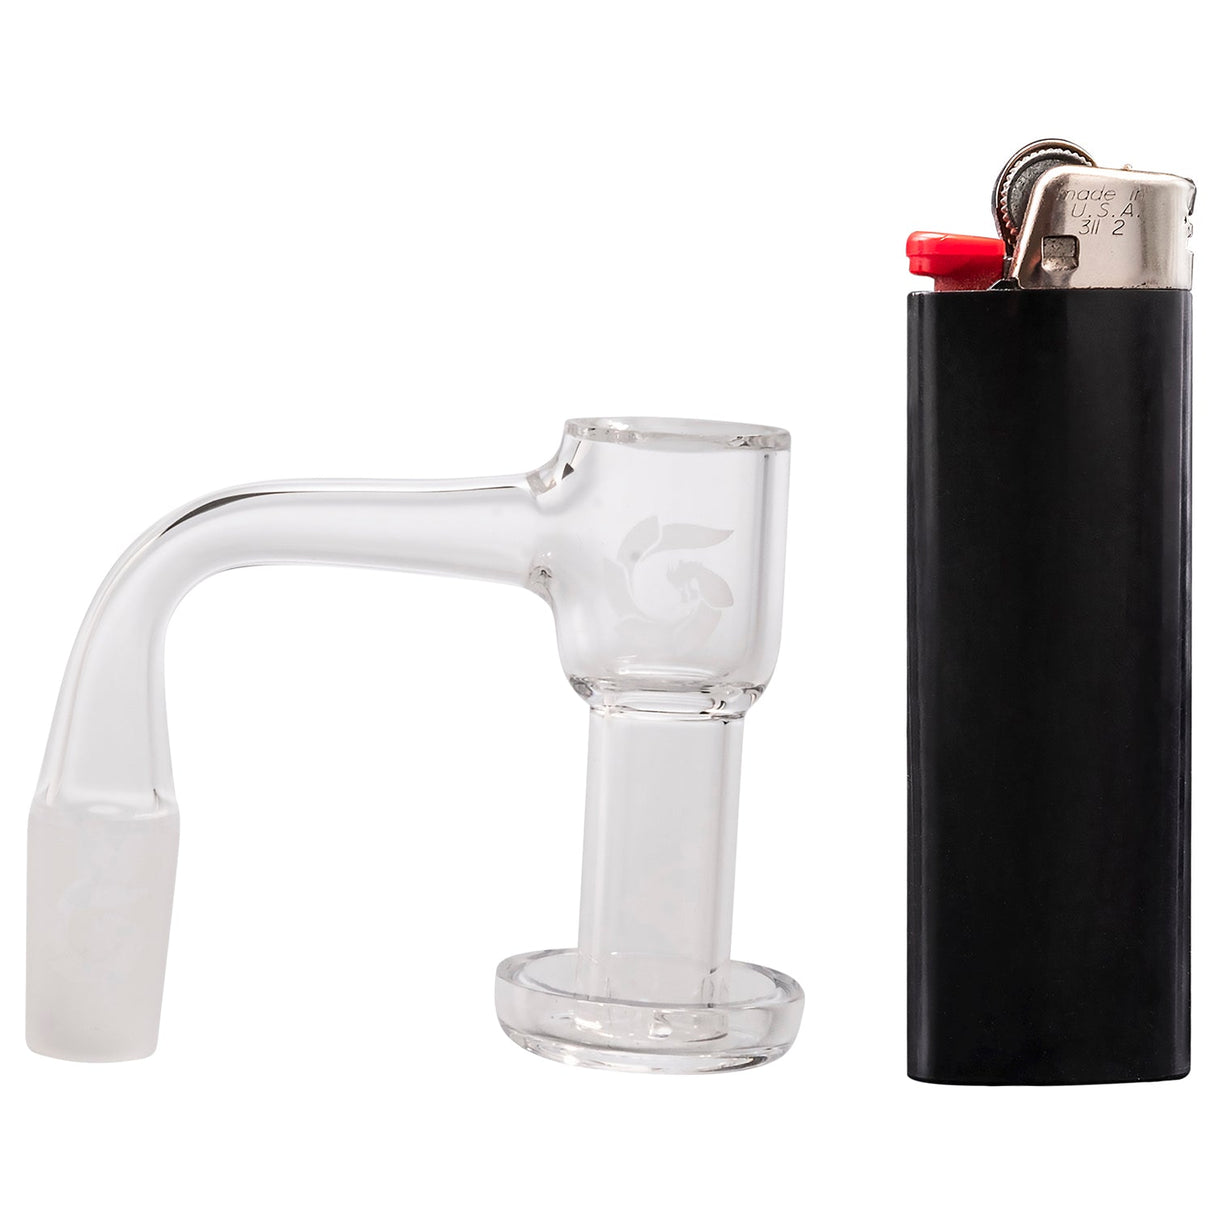 Glasshouse Mini Quartz Terp Vacuum Kit, 14mm Male Joint, with Lighter for Scale